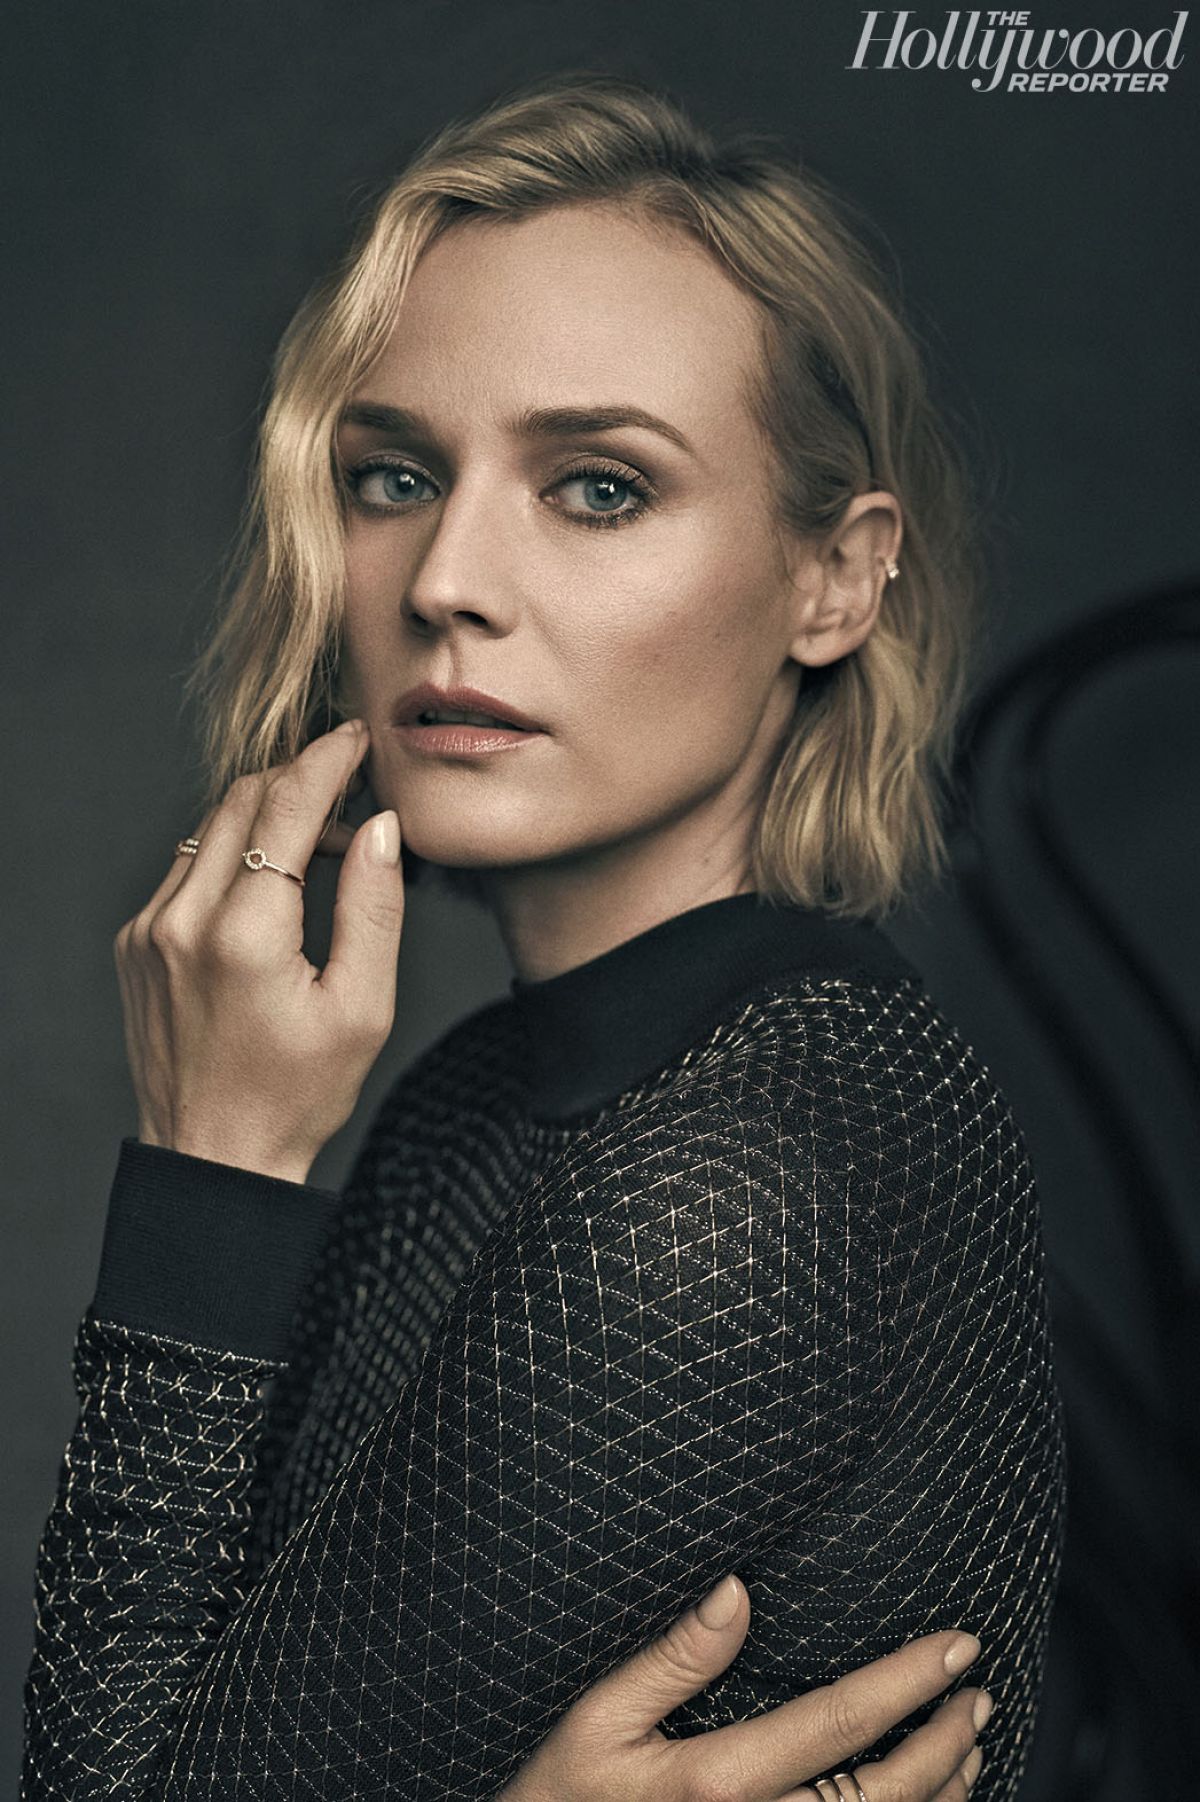 Diane Kruger Poses for The Hollywood Reporter's Live Roundtable, December 2017